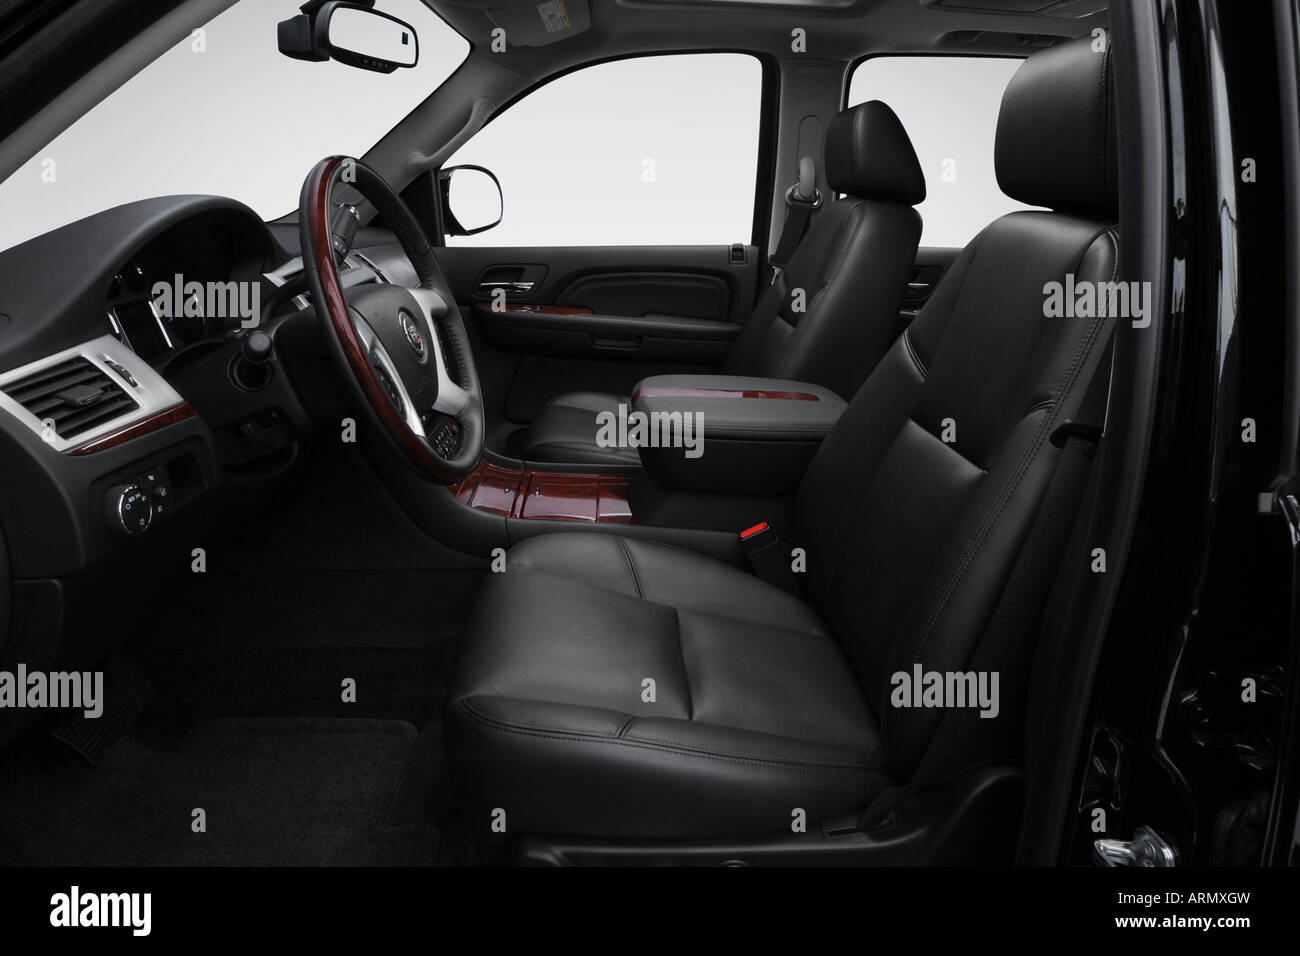 2008 Cadillac Escalade EXT in Black - Front seats Stock Photo - Alamy